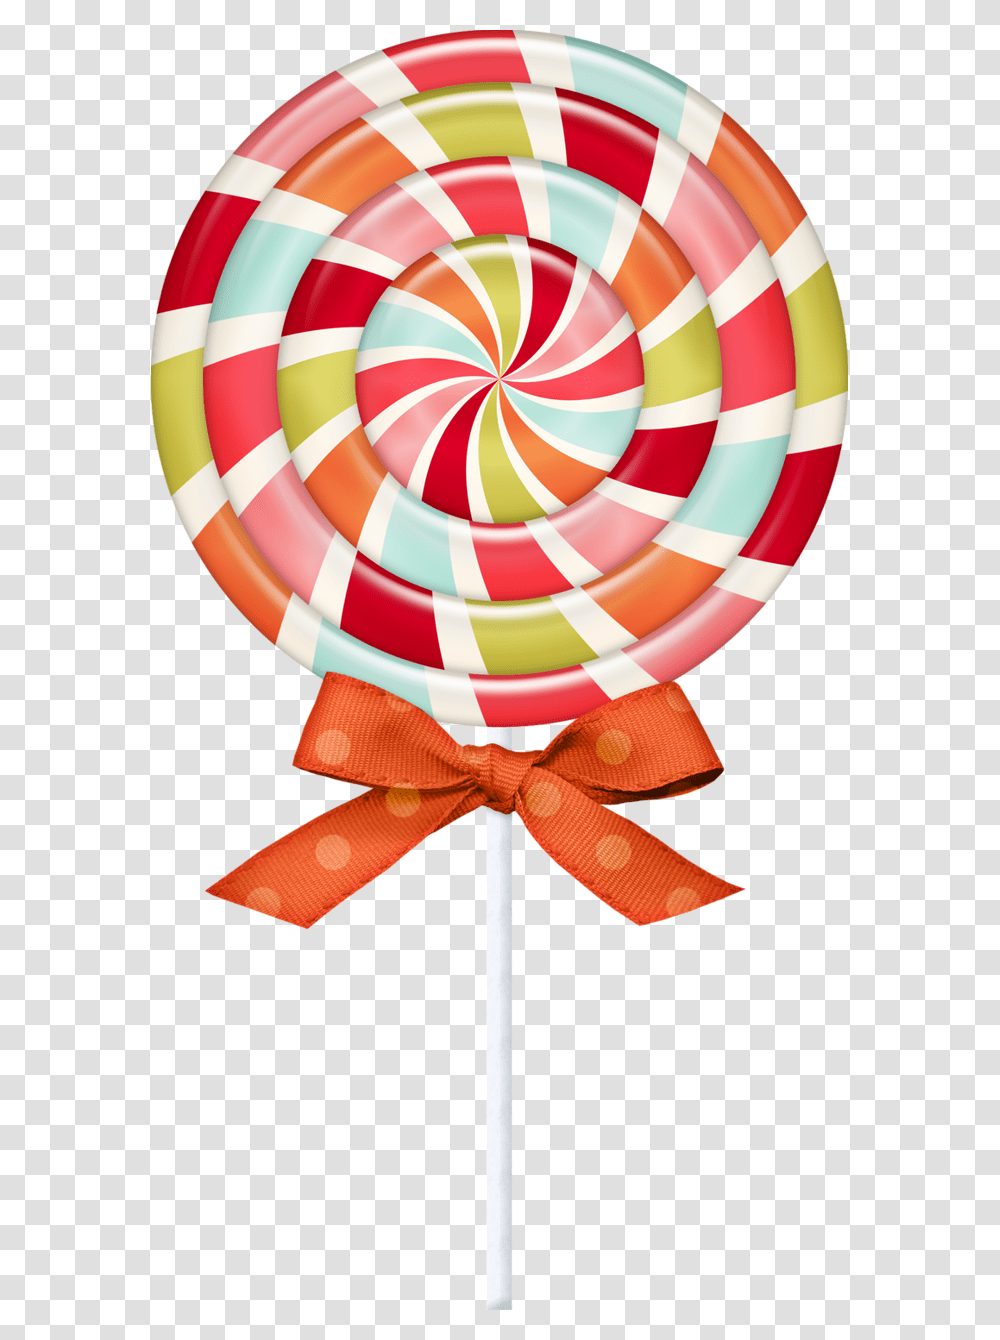 Clip Royalty Free Stock Lollipop Clipart Pinwheel Pirulito Bengala, Balloon, Food, Candy, Sweets Transparent Png